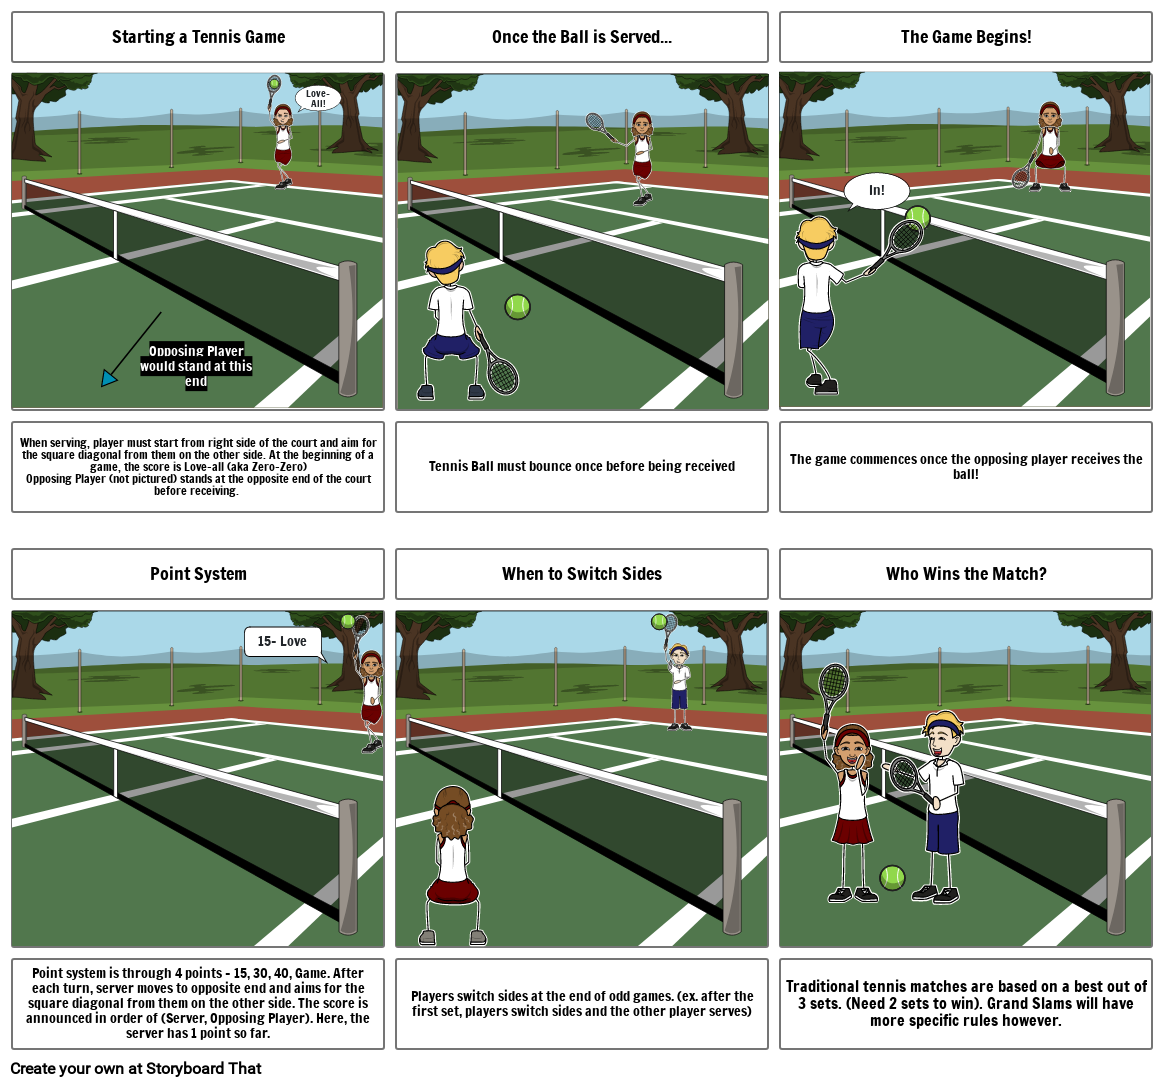 NSED 130 Storyboard - Basic Rules of Tennis Comic